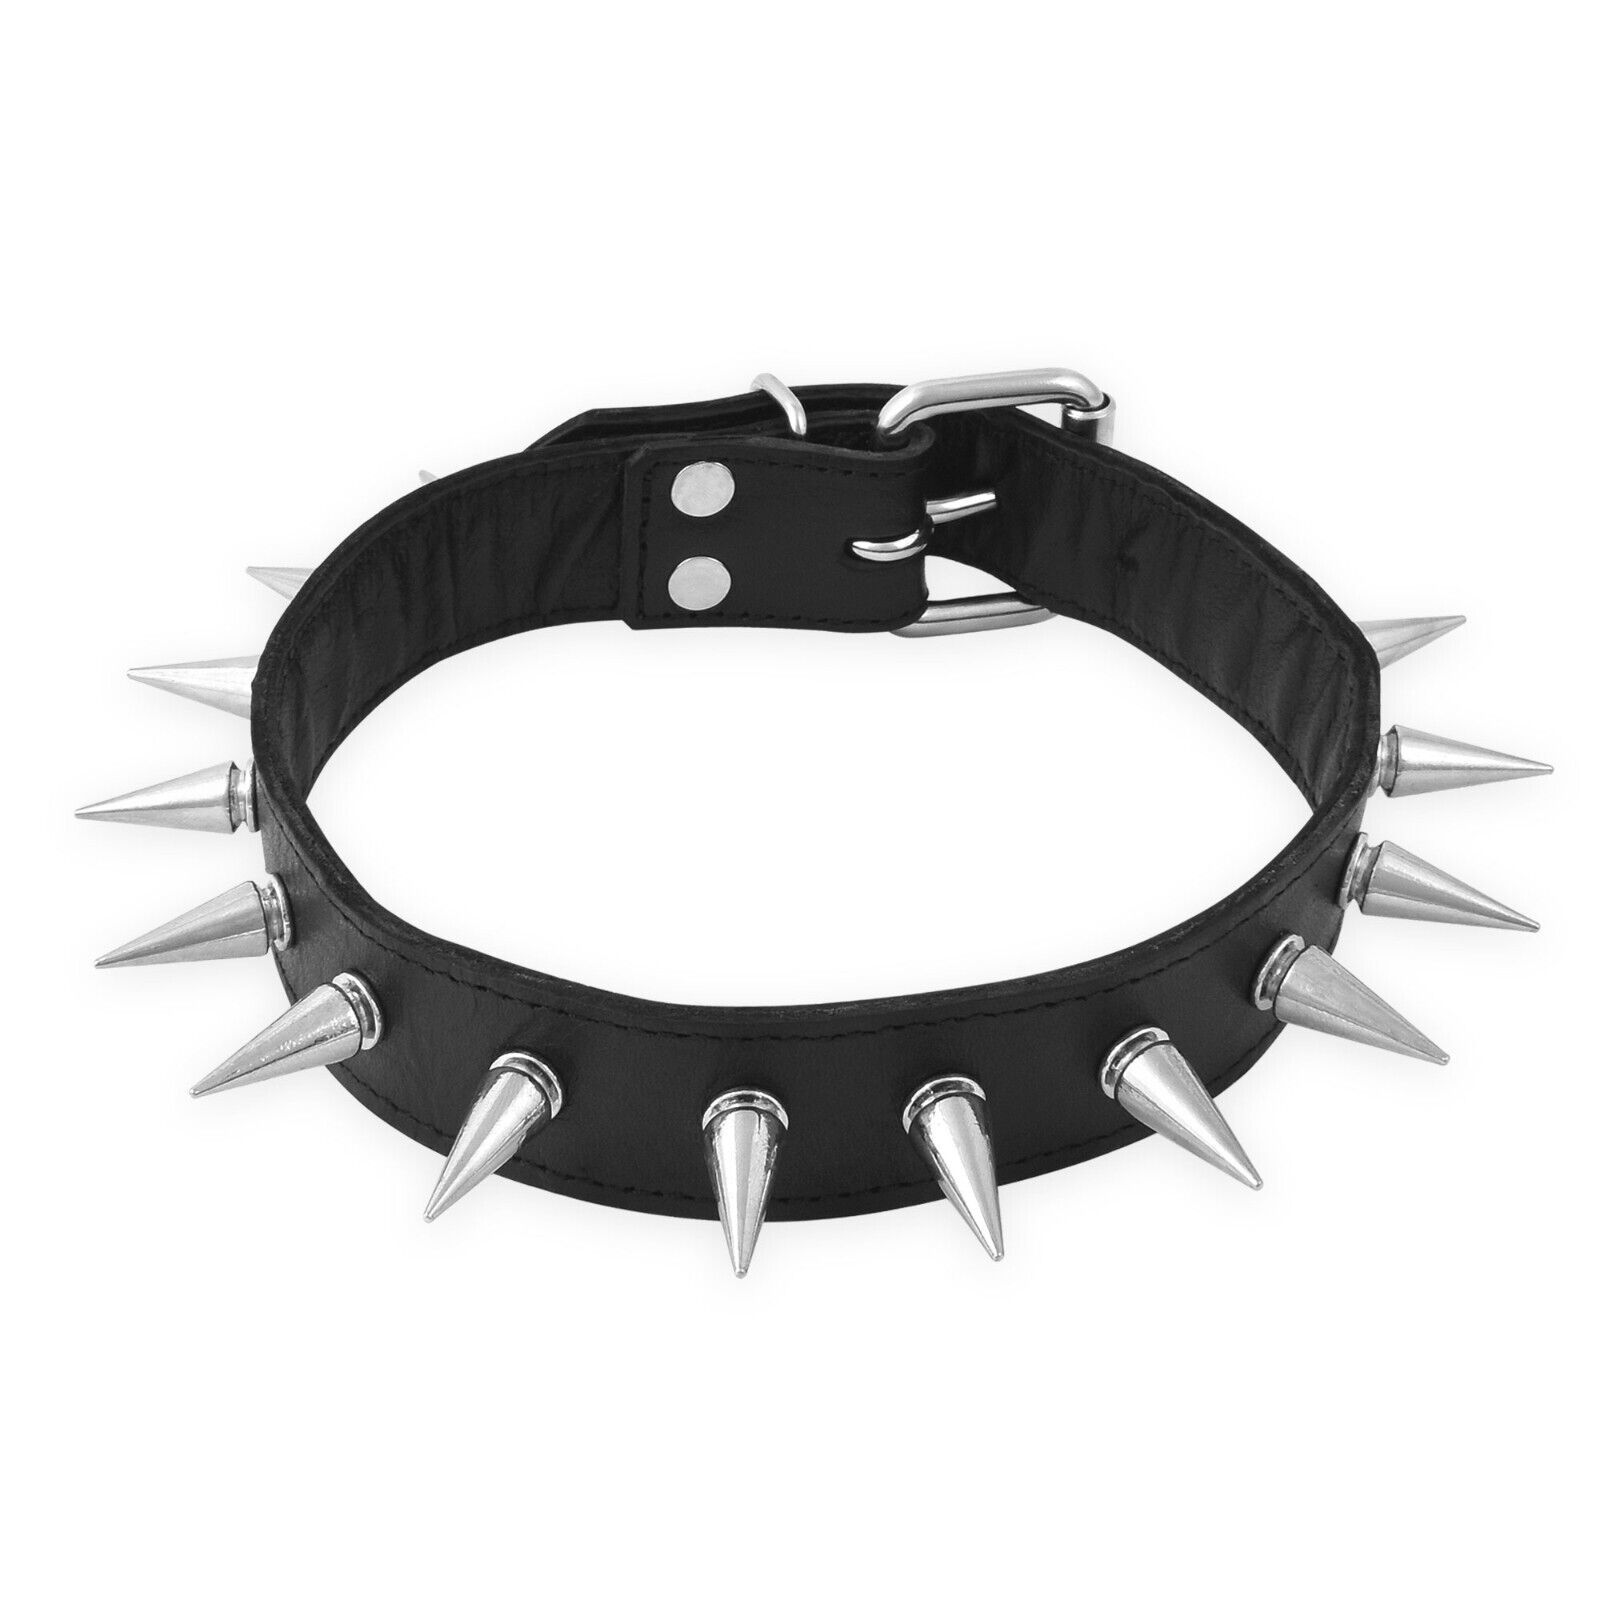 Primary image for Real Cow Leather Spiked Choker Collar , BDSM Leather Choker with Metal Spikes